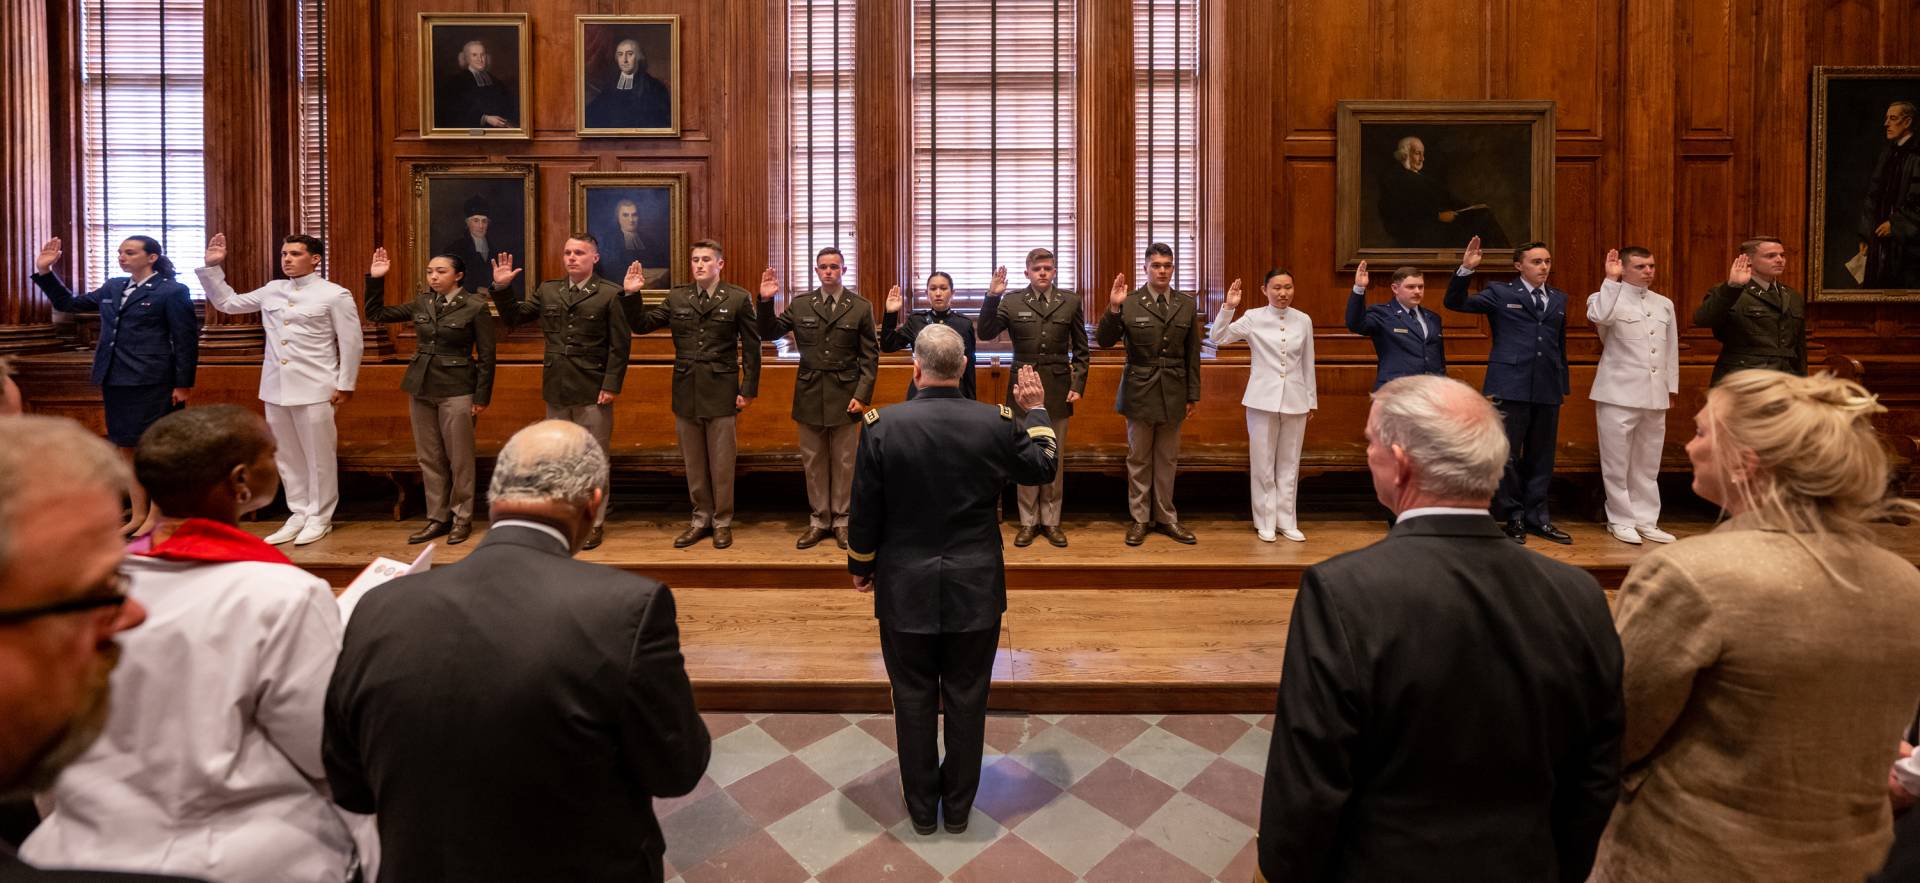 General Milley administers the oath to commissioning officers